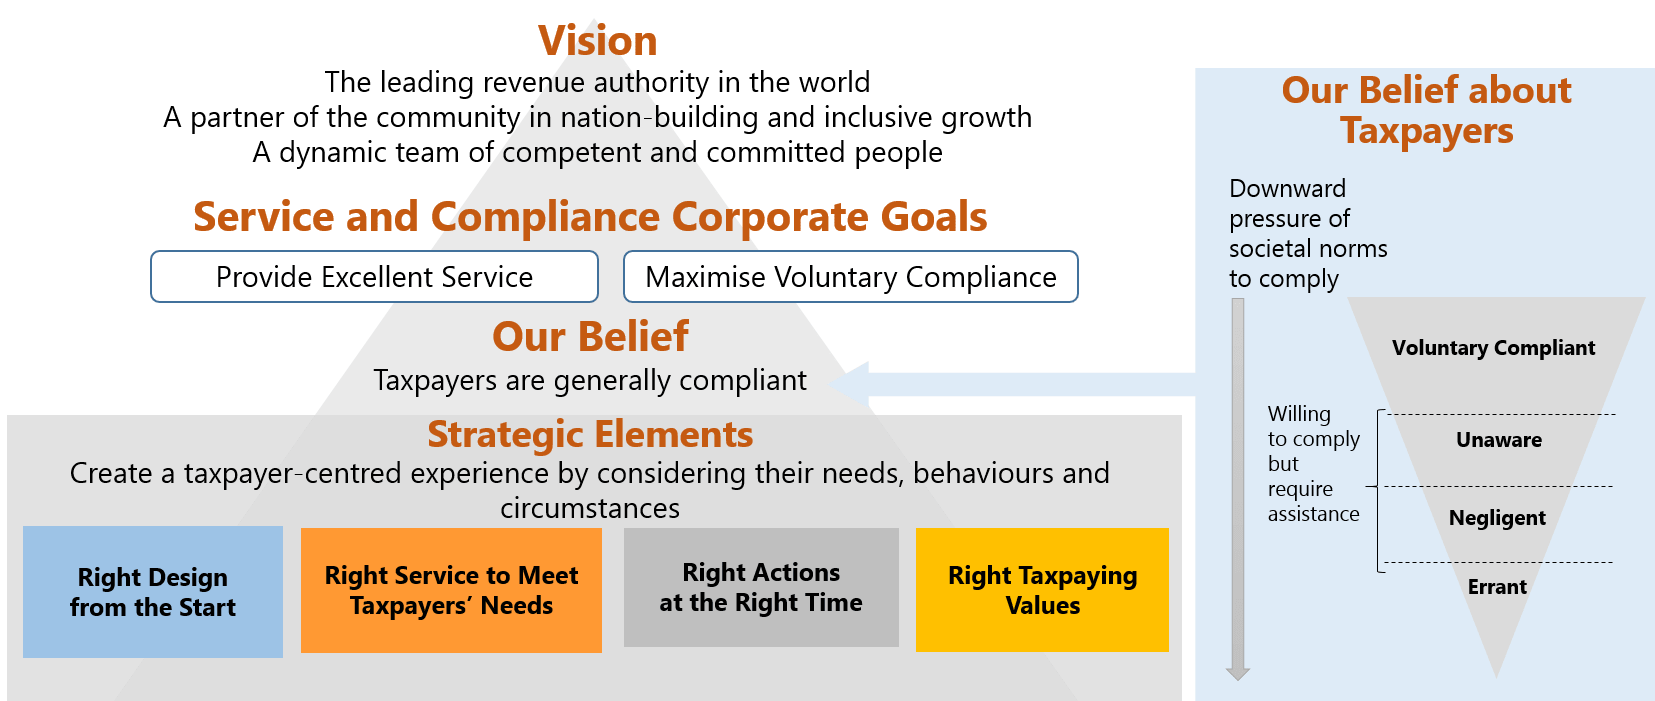 The Integrated Compliance and Service Framework sets out IRAS’ high level strategies for achieving our corporate goals of providing excellent service and maximising voluntary compliance. The framework is premised on our belief that taxpayers are generally compliant.